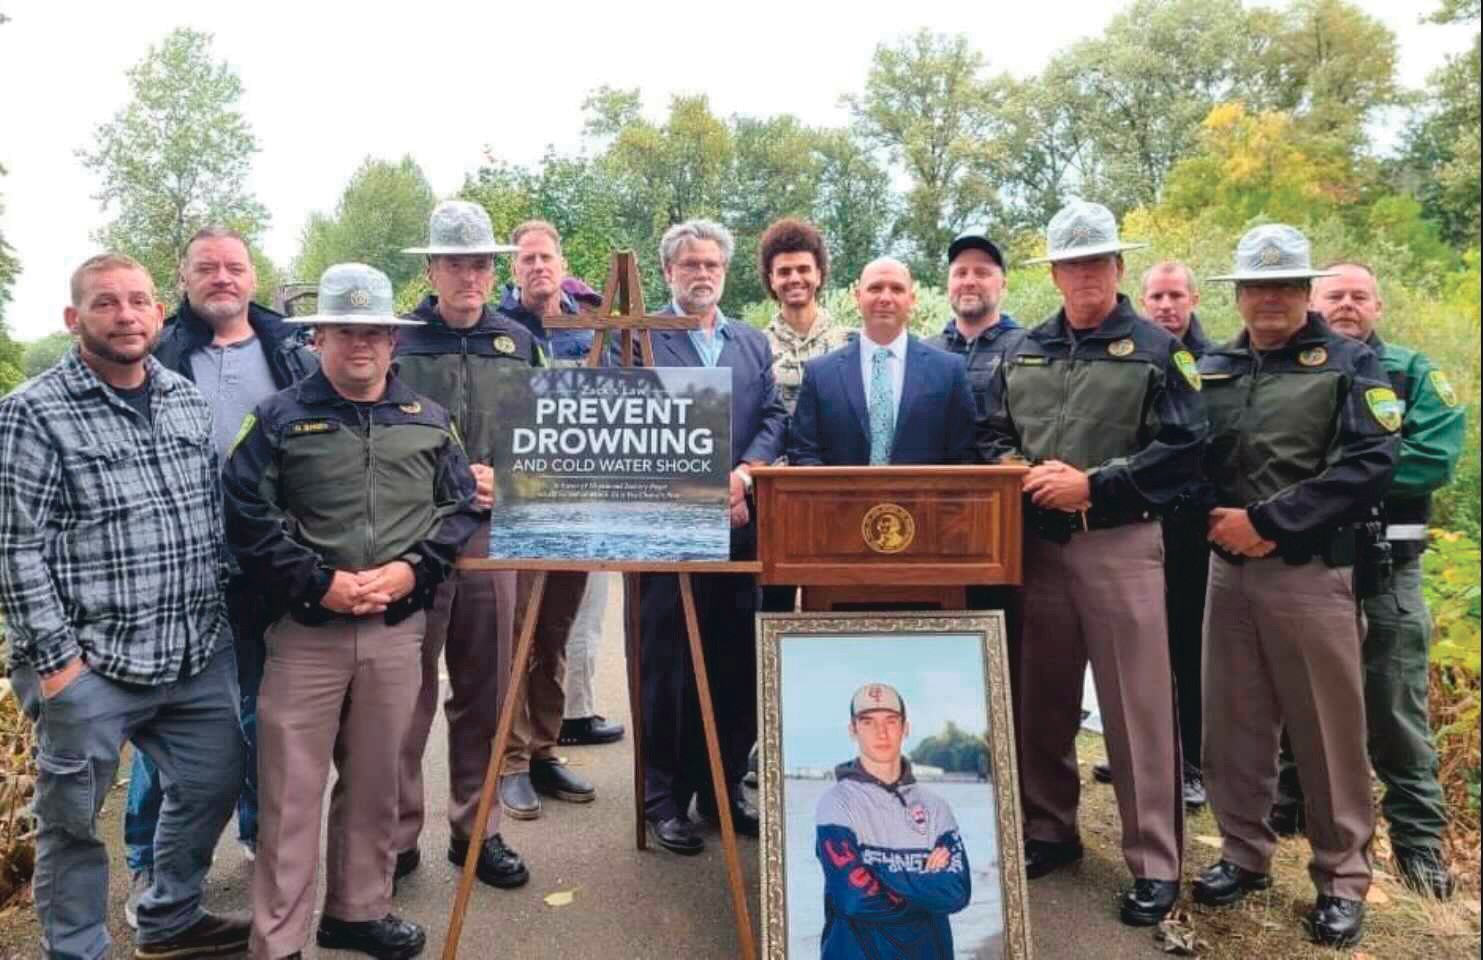 Community leaders, law enforcement and family of Zachary Rager pose for a photo along the Willapa Hills Trail during an event raising awareness around cold water shock to prevent drownings.